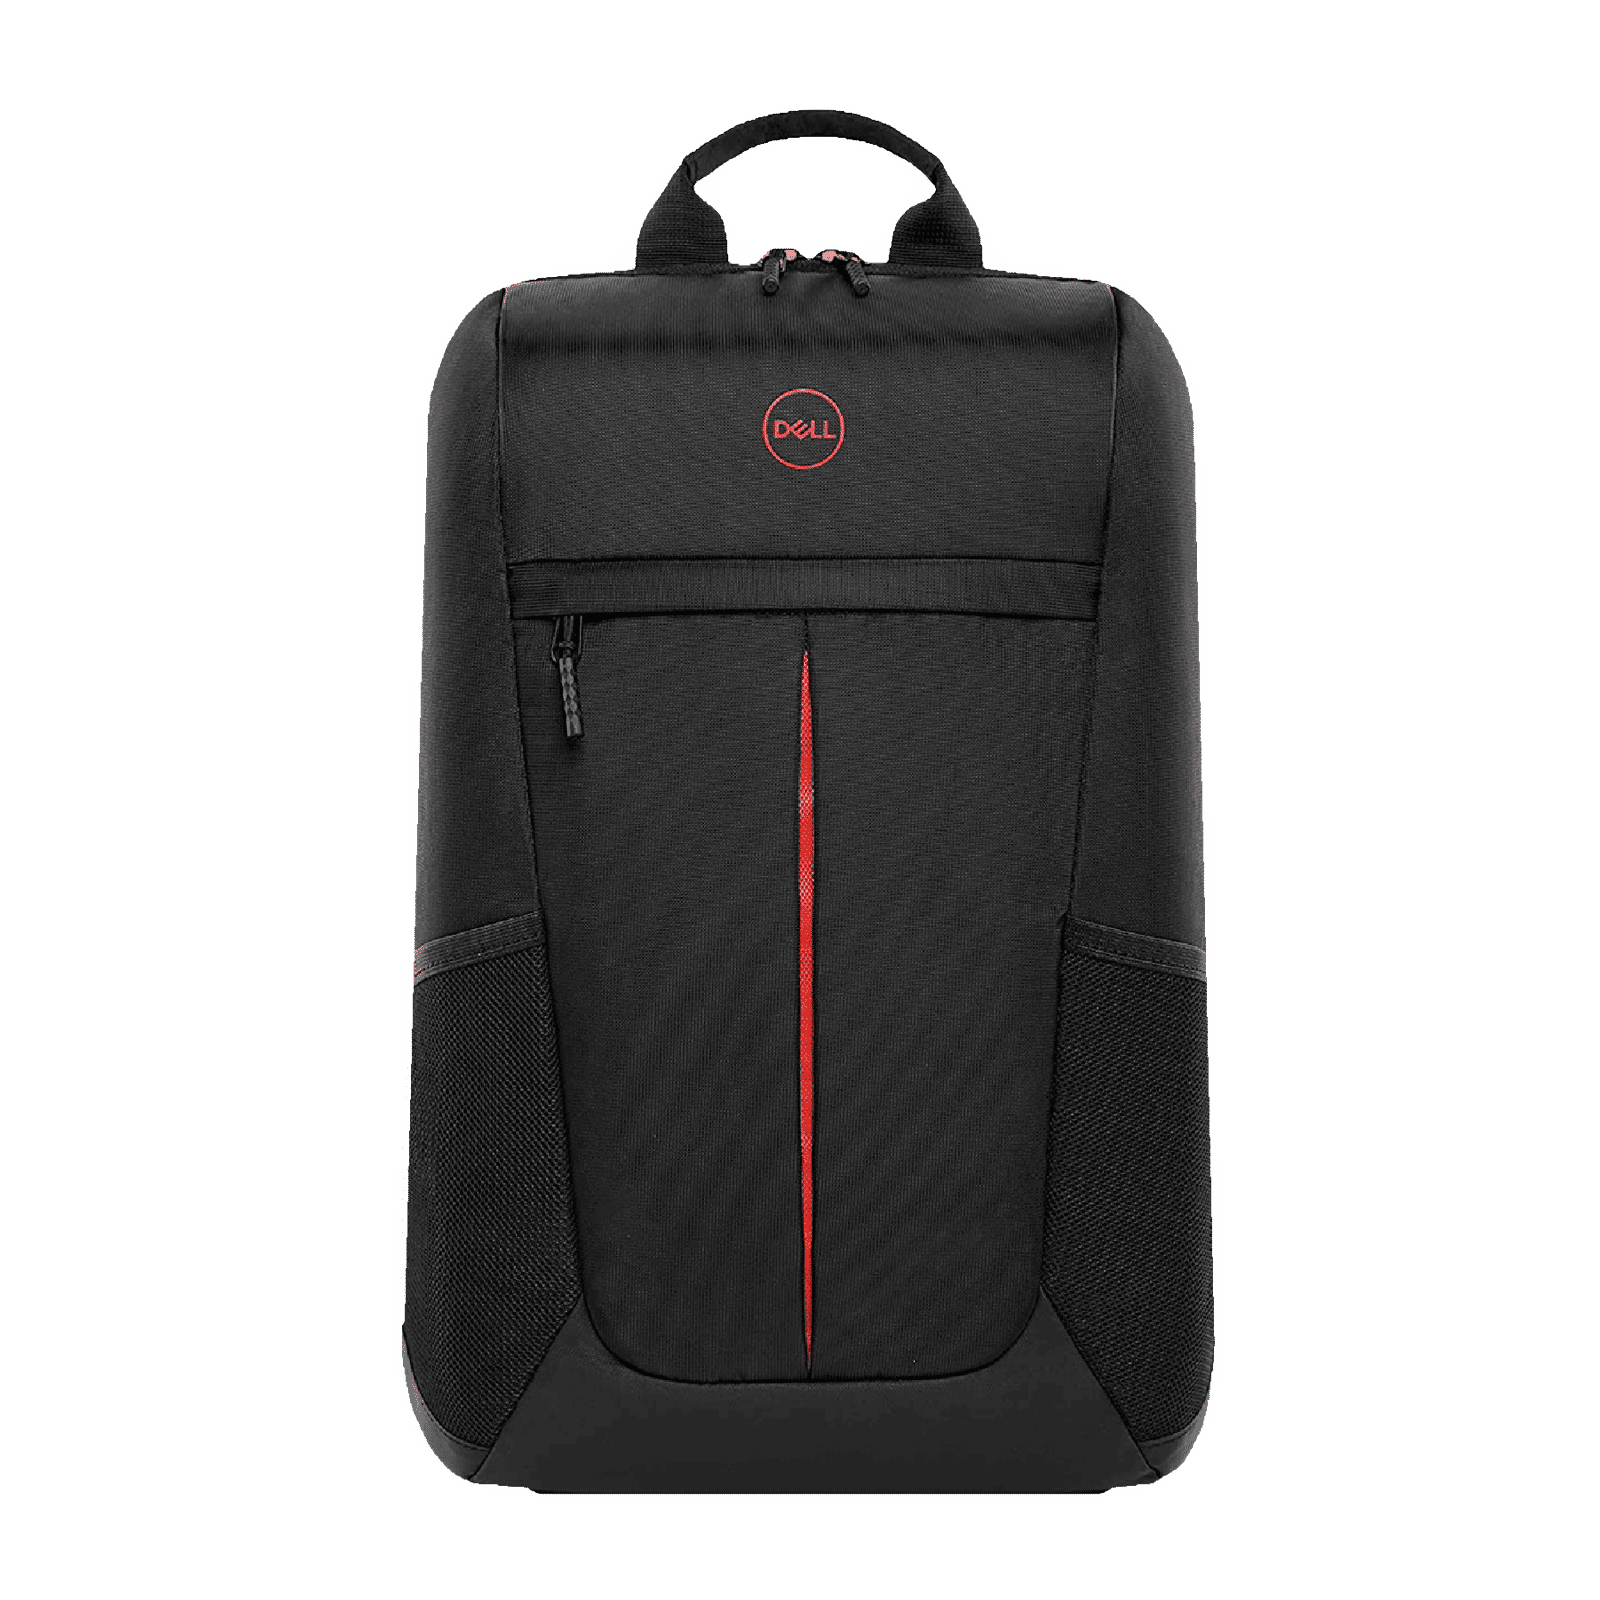 HP Laptop Bag & Backpack - 21 inches | Konga Online Shopping